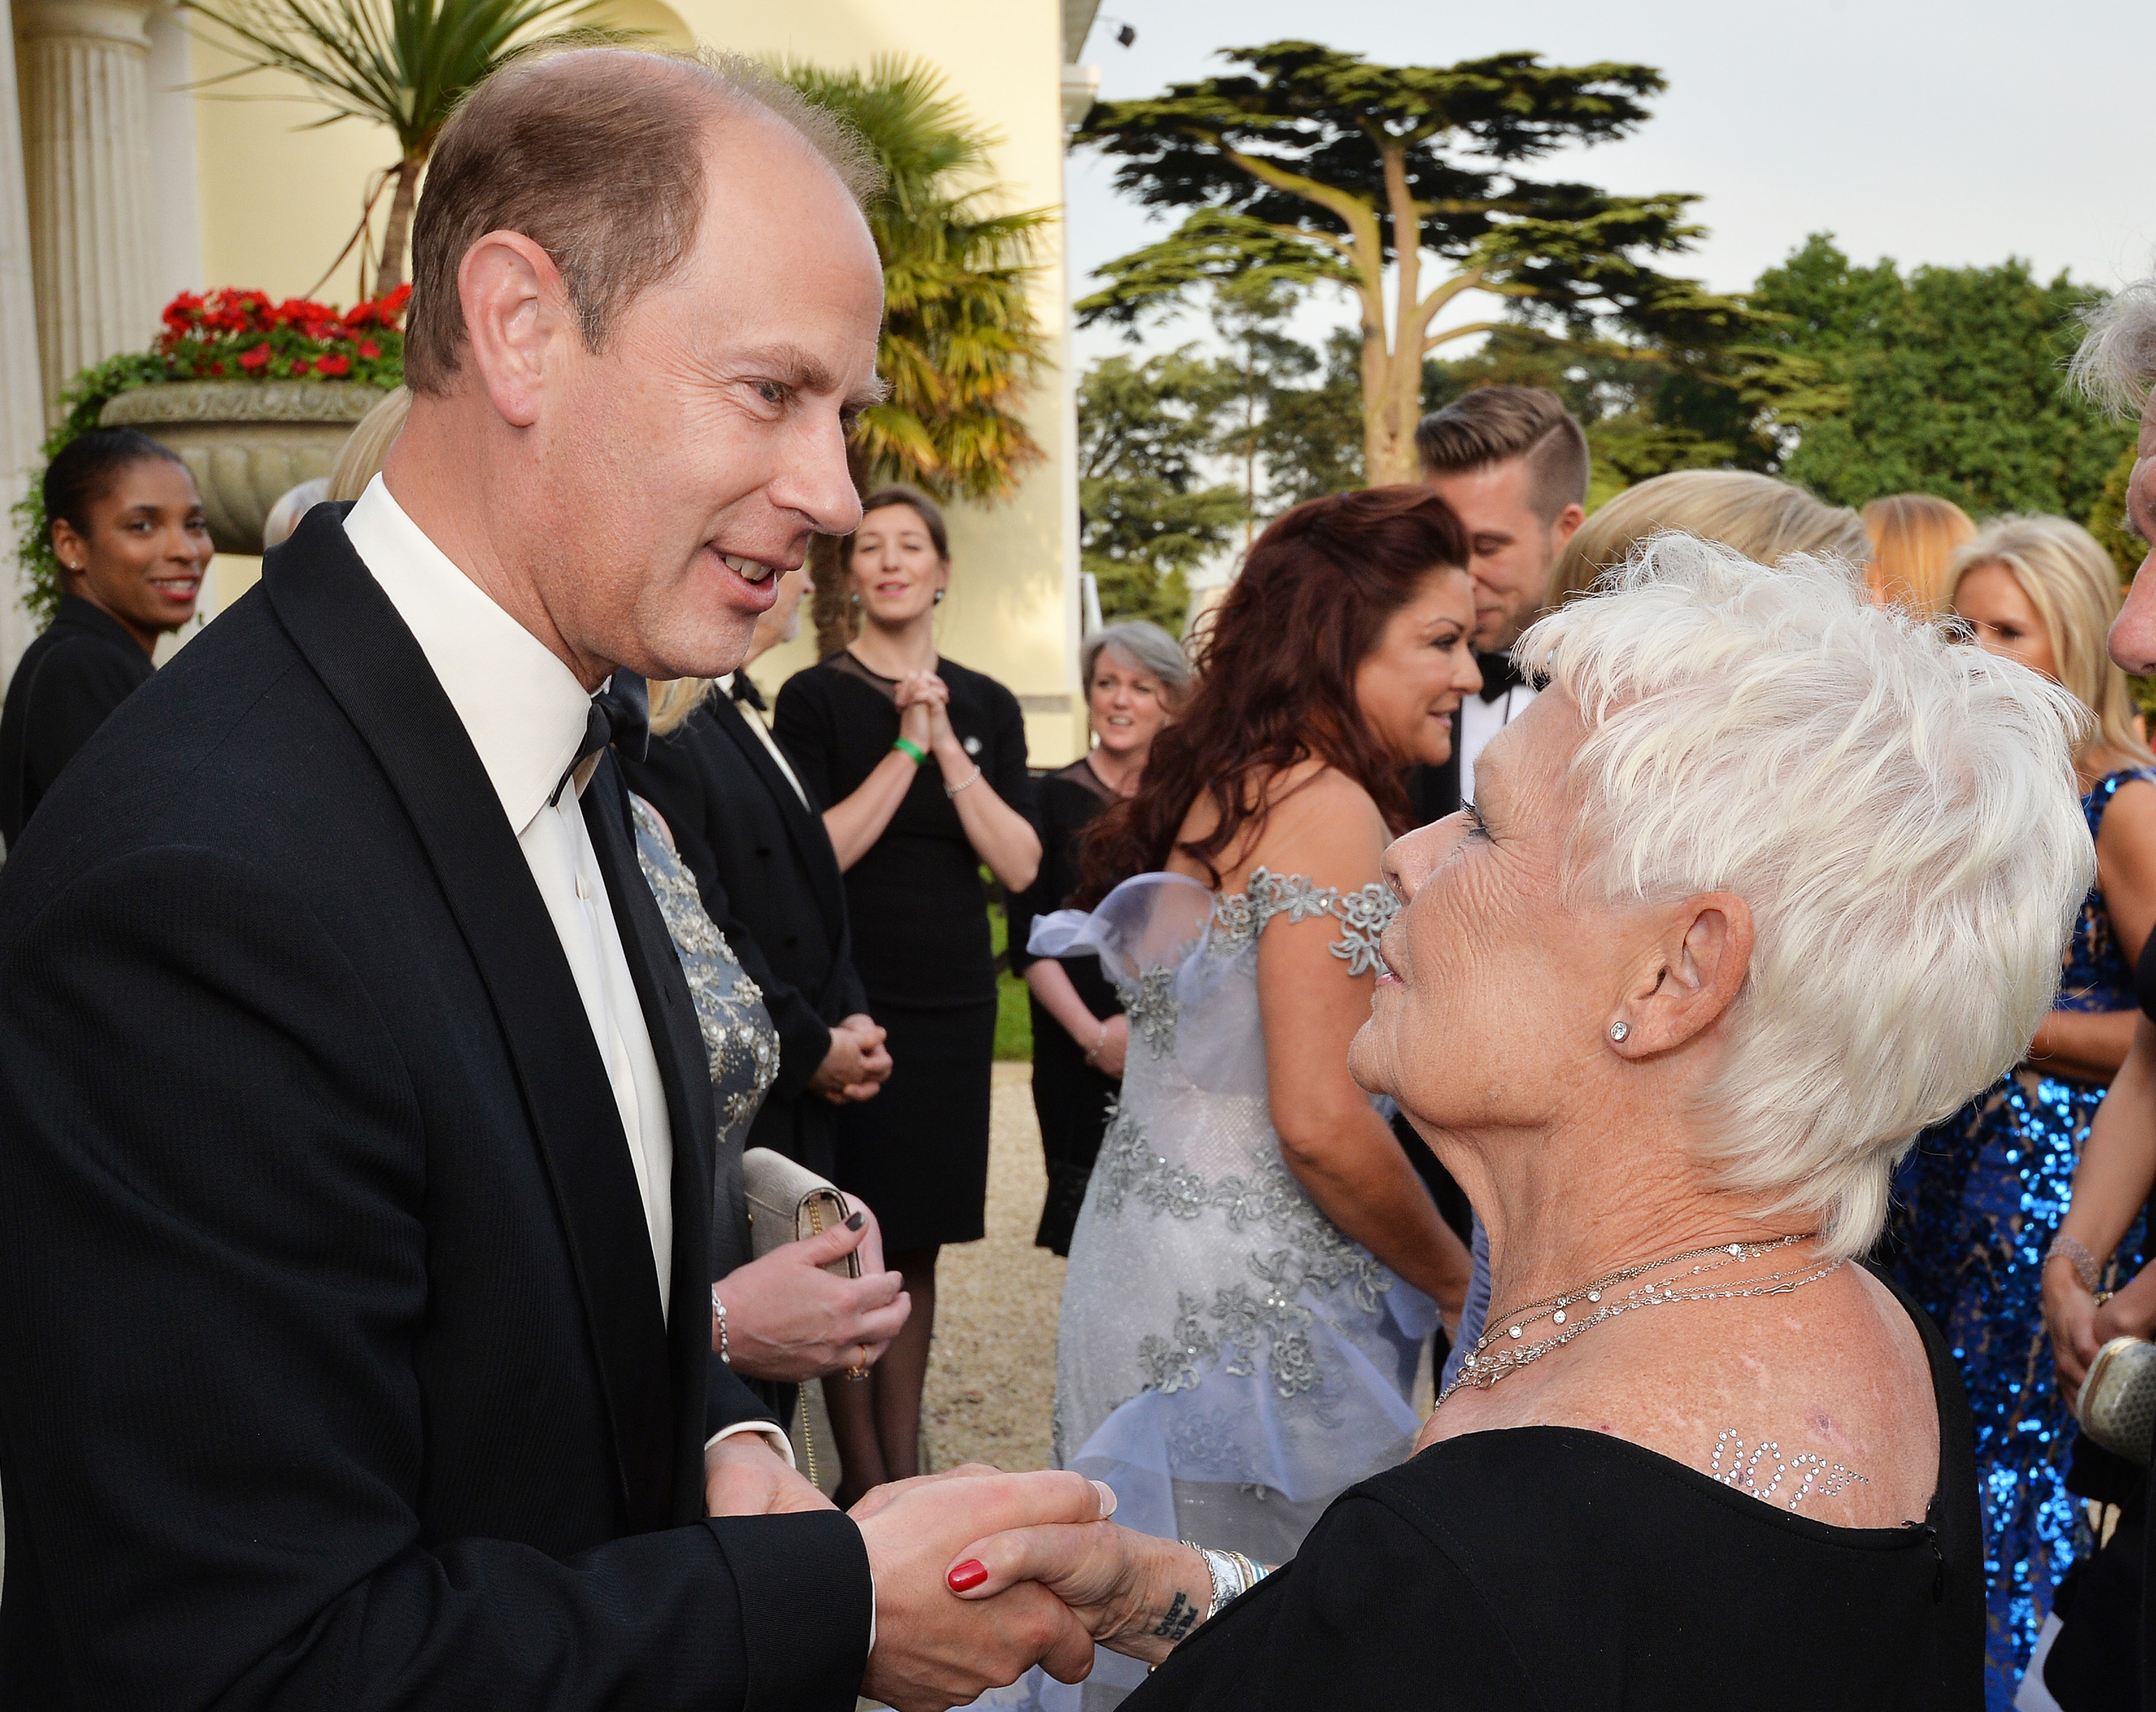 BUCKINGHAMSHIRE, ENGLAND - JUNE 9:   The Earl of Wessex (left) talks with Dame Judi Dench attend a Gala Evening marking the 60th anniversary of The Duke of Edinburgh's Award at Stoke Park on June 9, 2016 in Buckinghamshire, England.  The Duke of Edinburgh will be joined by 007 stars including Sir Roger Moore, Dame Judi Dench and Naomie Harris for a James Bond-themed charity gala. The "Diamonds Are Forever" fundraising event will mark the 60th anniversary of The Duke of Edinburgh's (DofE) Awards. Hosted by David Walliams, it will be attended by past and present cast and crew from the spy film series, including producers Michael Wilson and Barbara Broccoli.   (Photo by John Stillwell - WPA Pool/Getty Images) (WPA Pool—Getty Images)